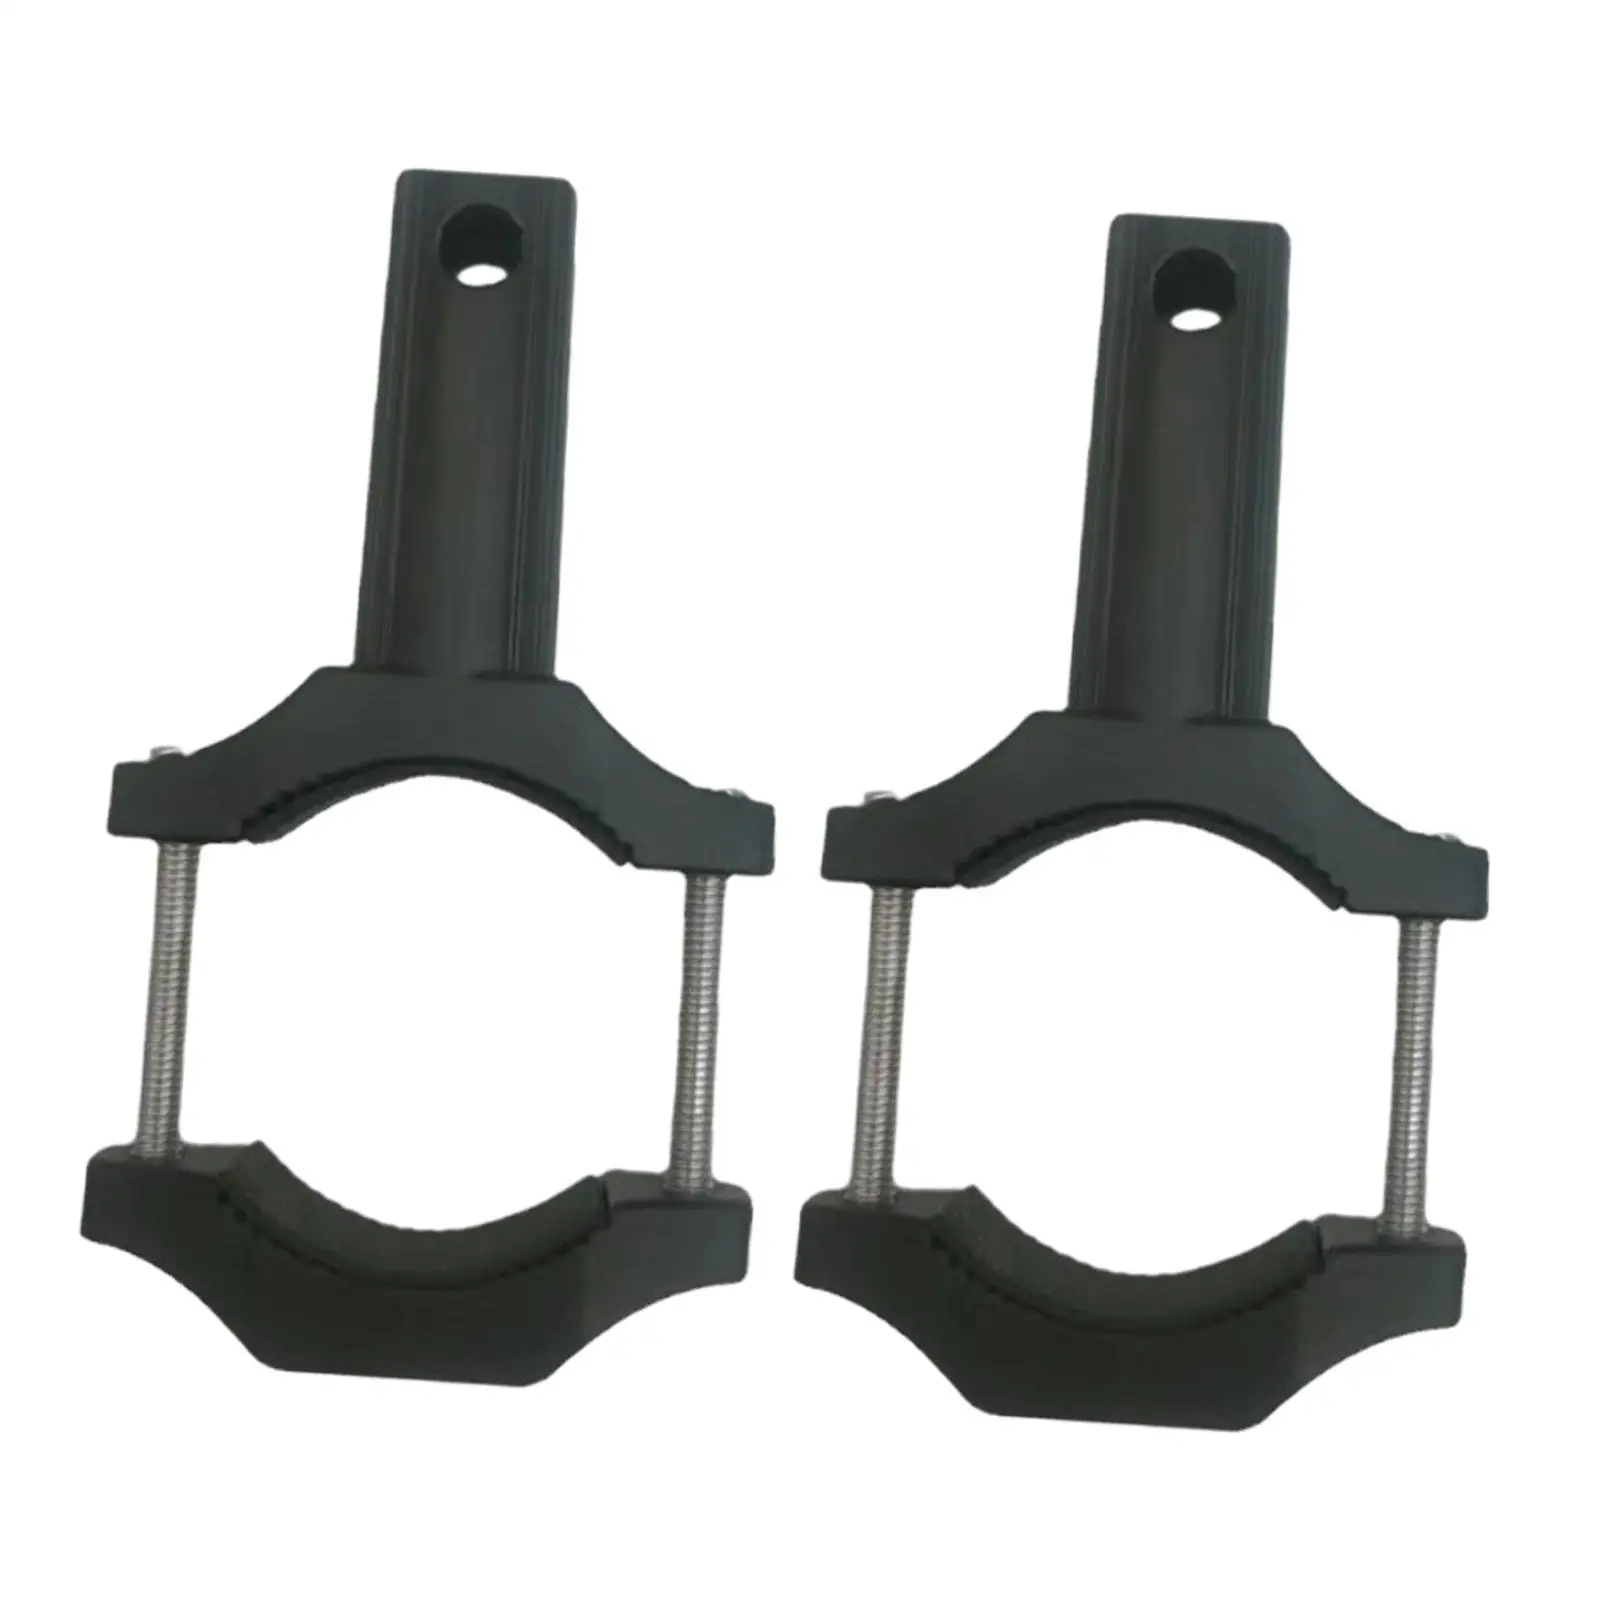 Motorcycle Spotlights Mounting Brackets for Direct Replacement Assembly